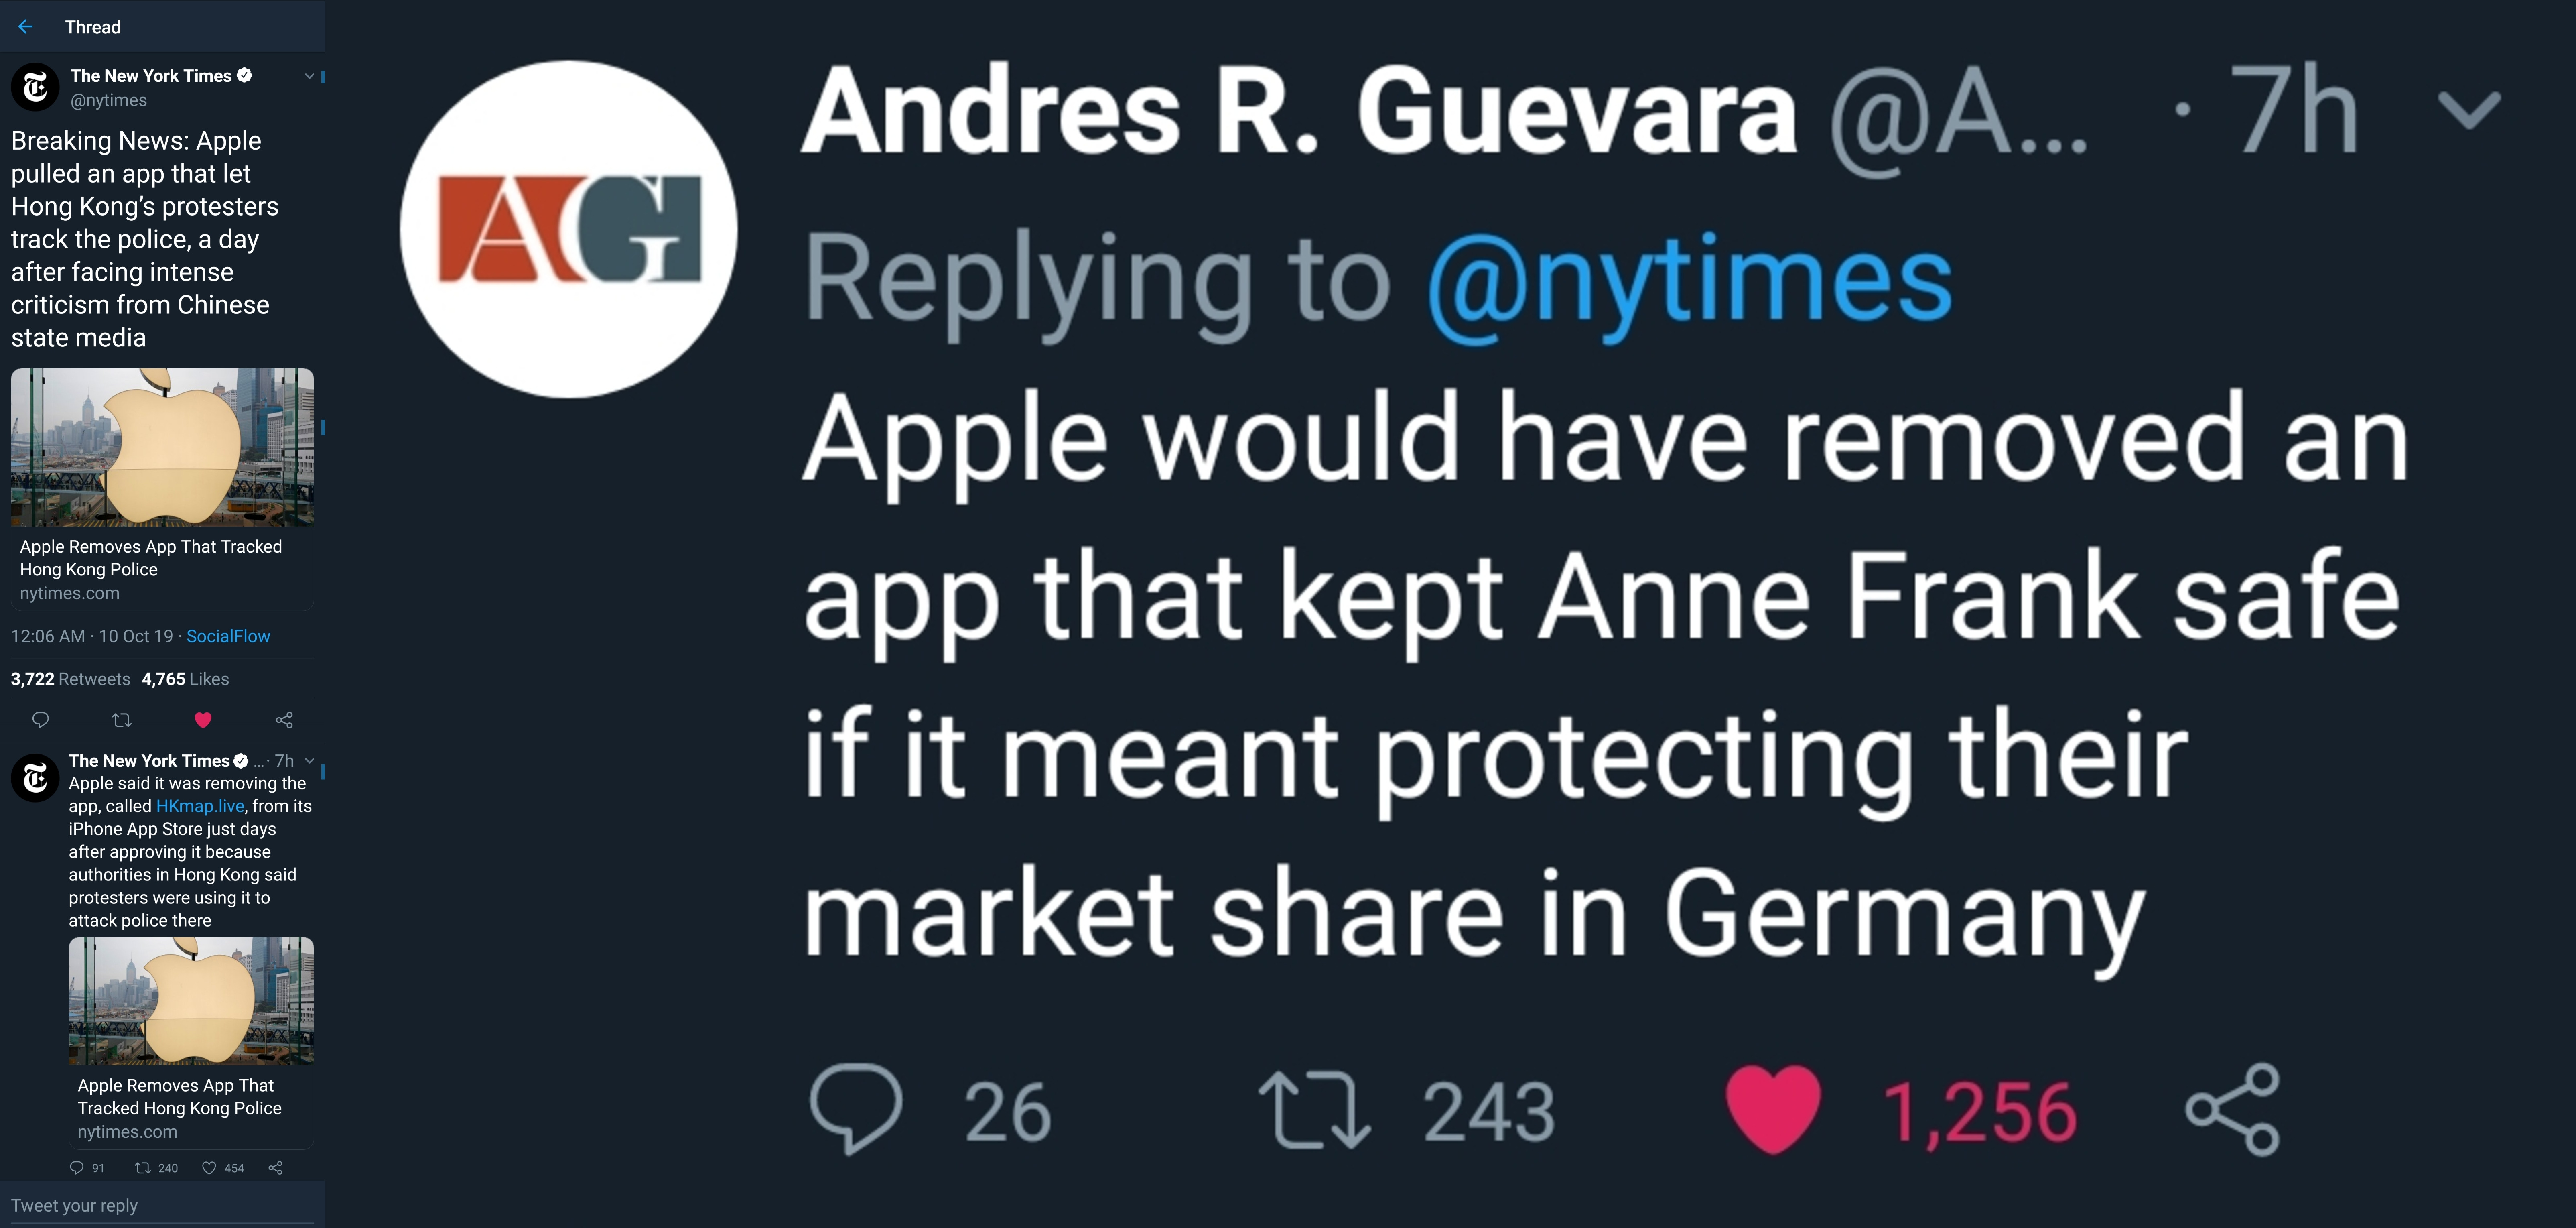 software - Howe Breaking News Apple pulled an app that hel Hong Kong protesters Agi after facing intense criticism from Chinese Andres R. Guevara ... .7h v Apple would have removed an app that kept Anne Frank safe if it meant protecting their market in Ge